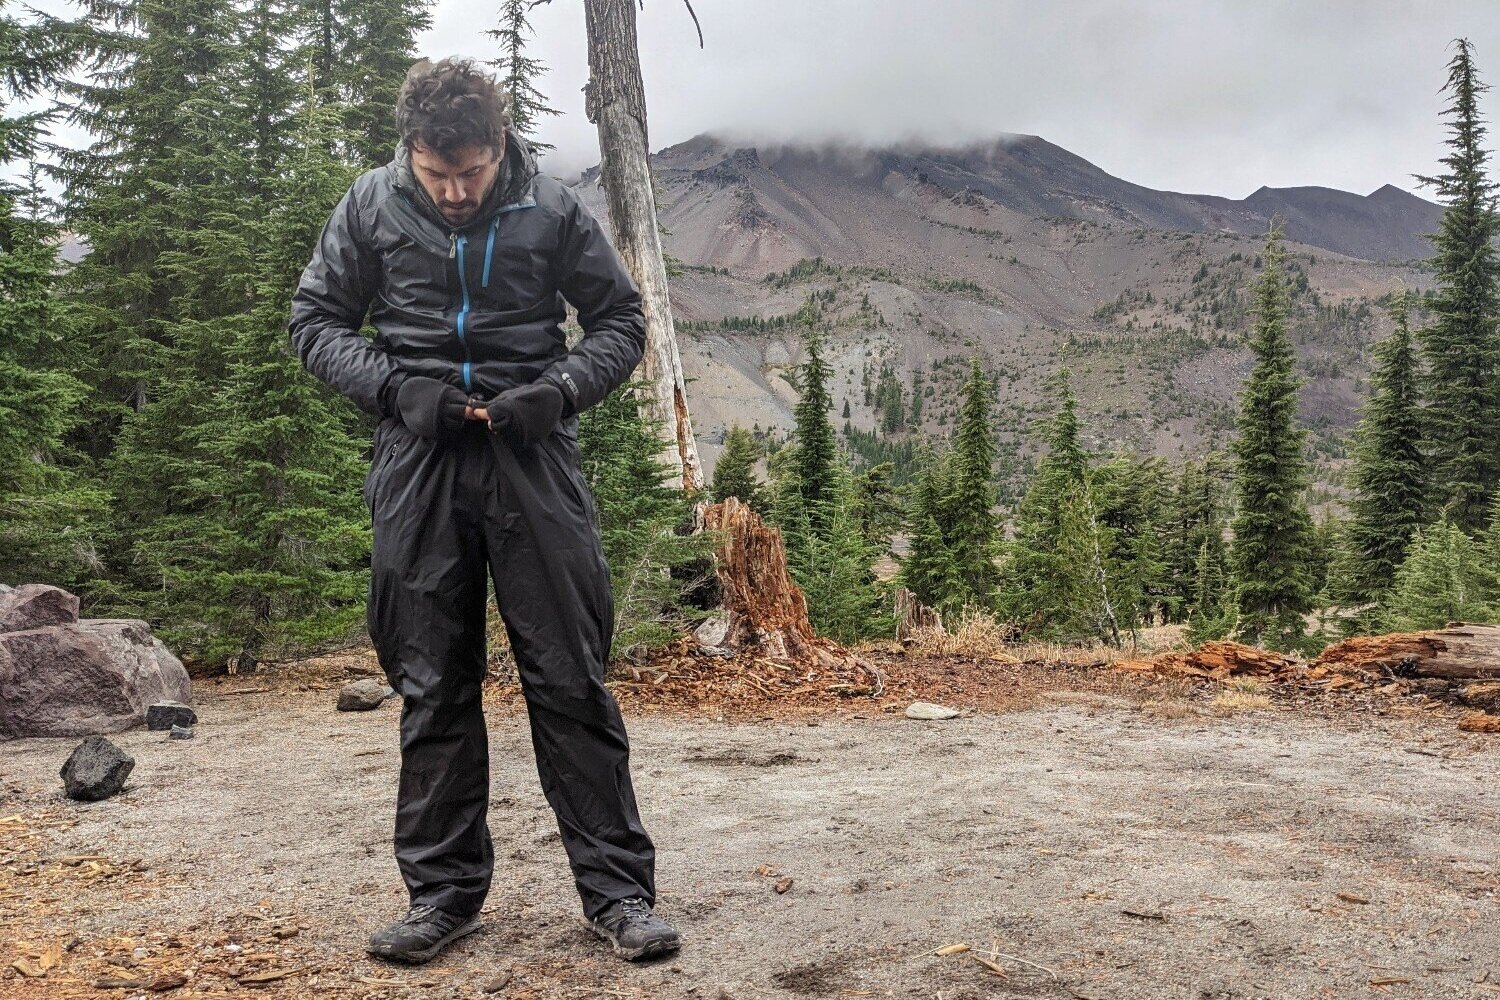 The REI Rainier Full-Zip Pants are an affordable 2.5-layer rain pant.